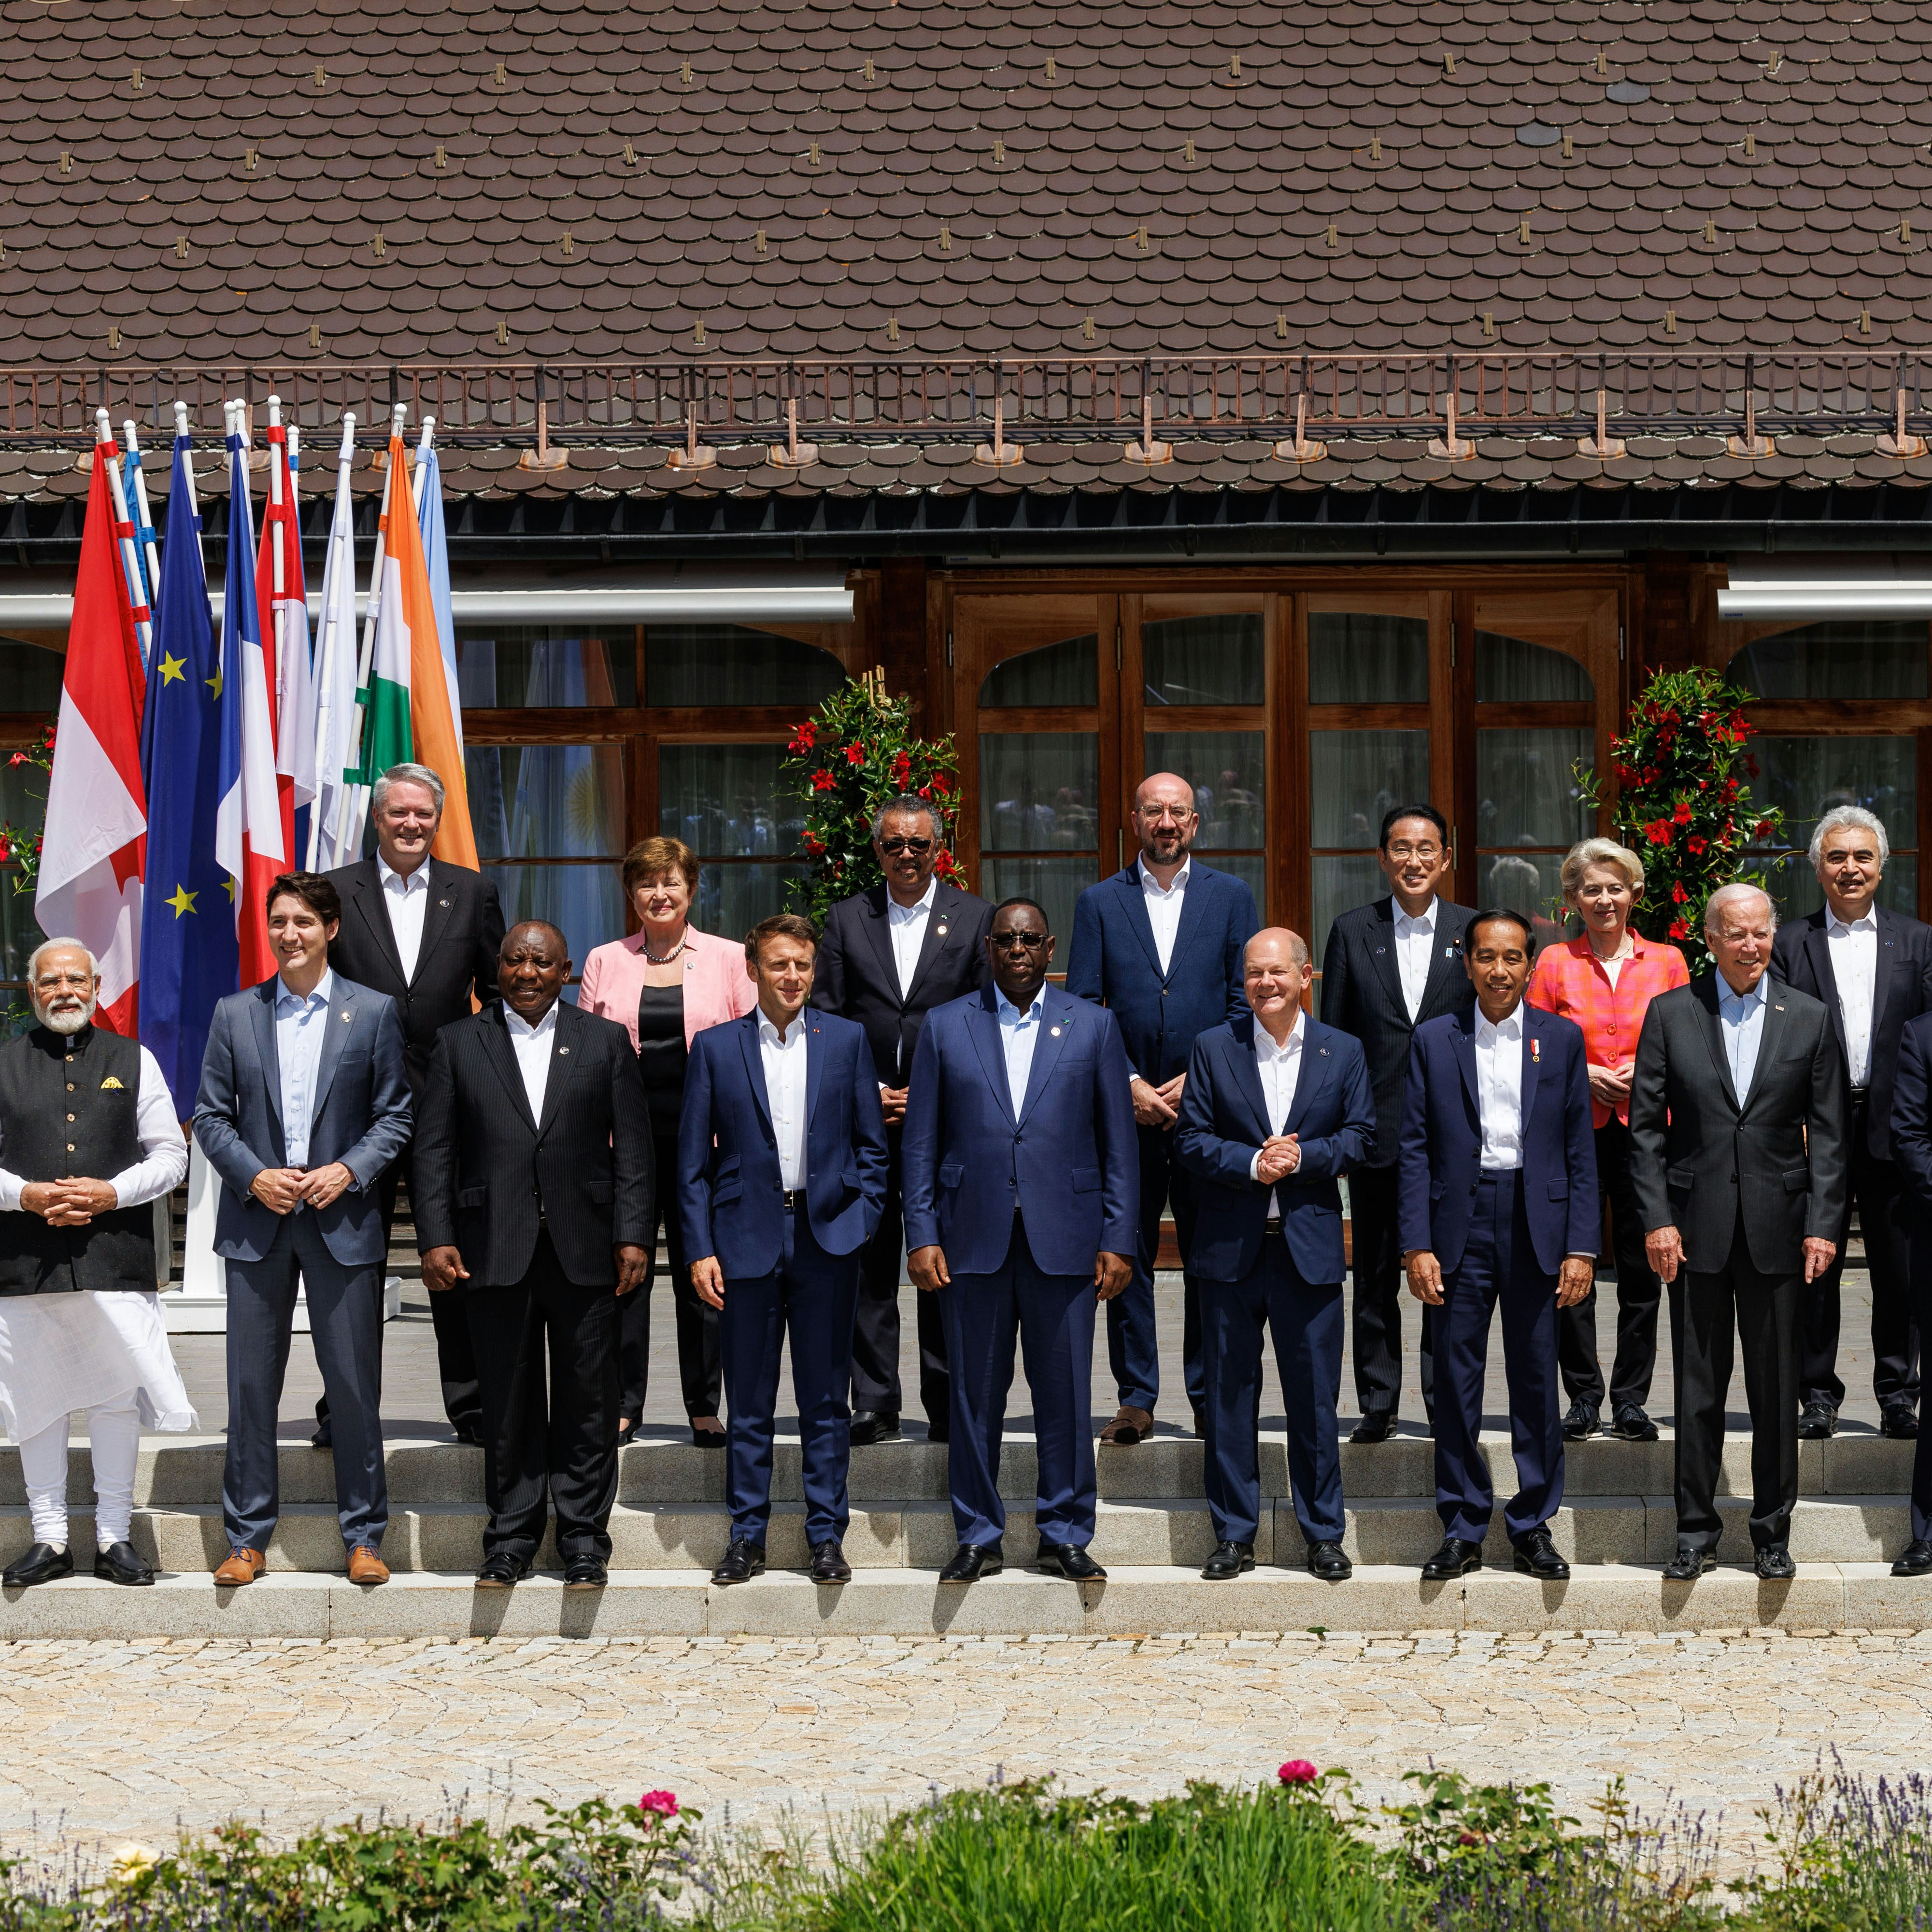 iea-executive-director-addresses-world-leaders-at-g7-summit-in-germany-news-iea